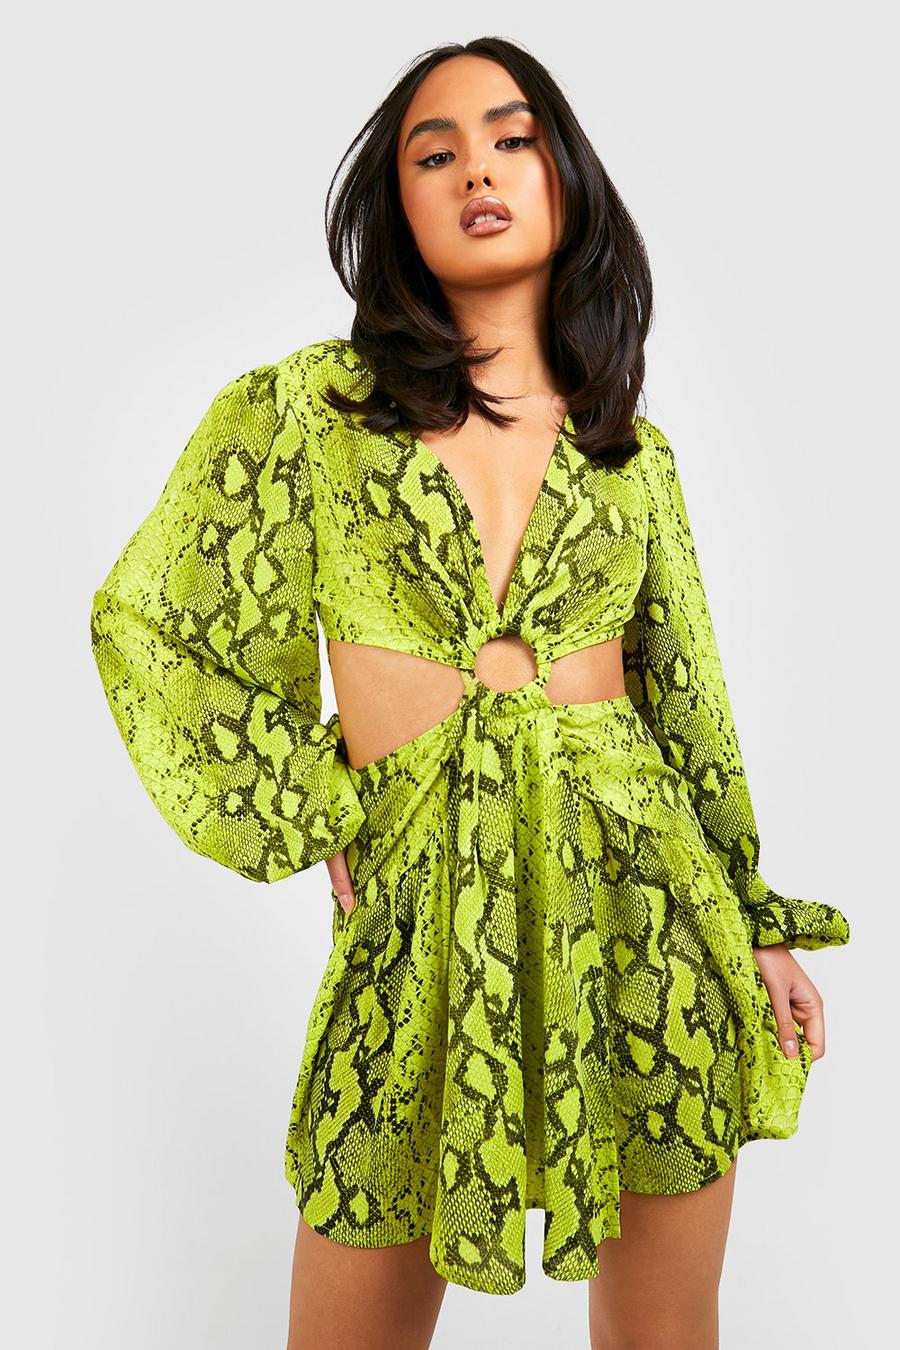 Cut-Out Playsuit mit Schlagenprint, Lime green